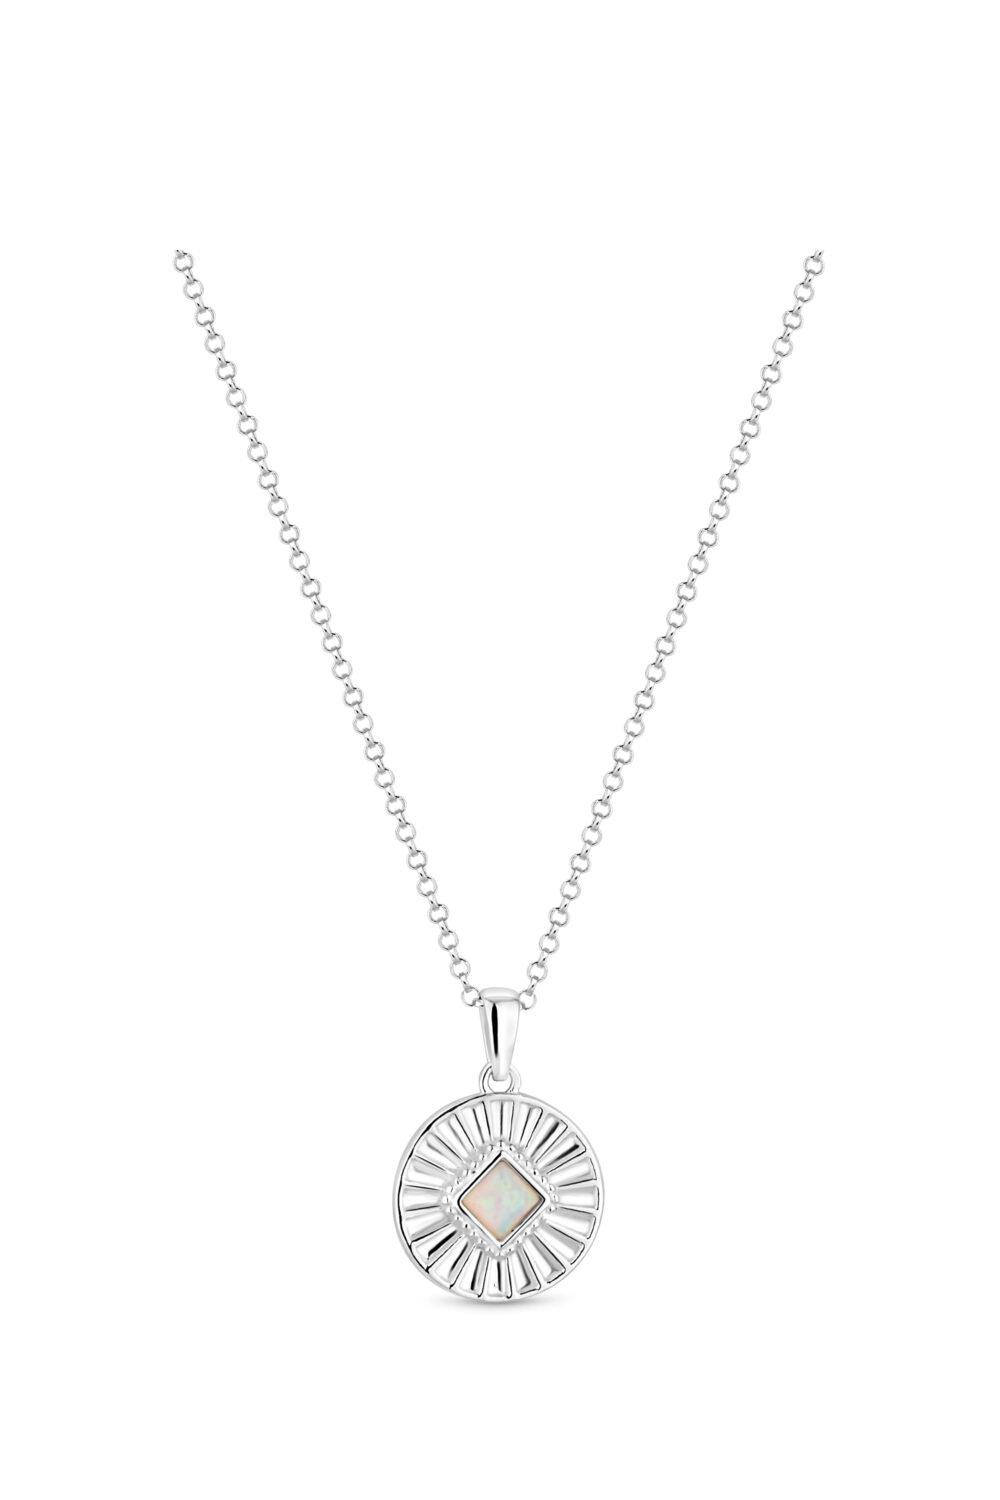 Jewellery | Sterling Silver Opal Necklace | Simply Silver